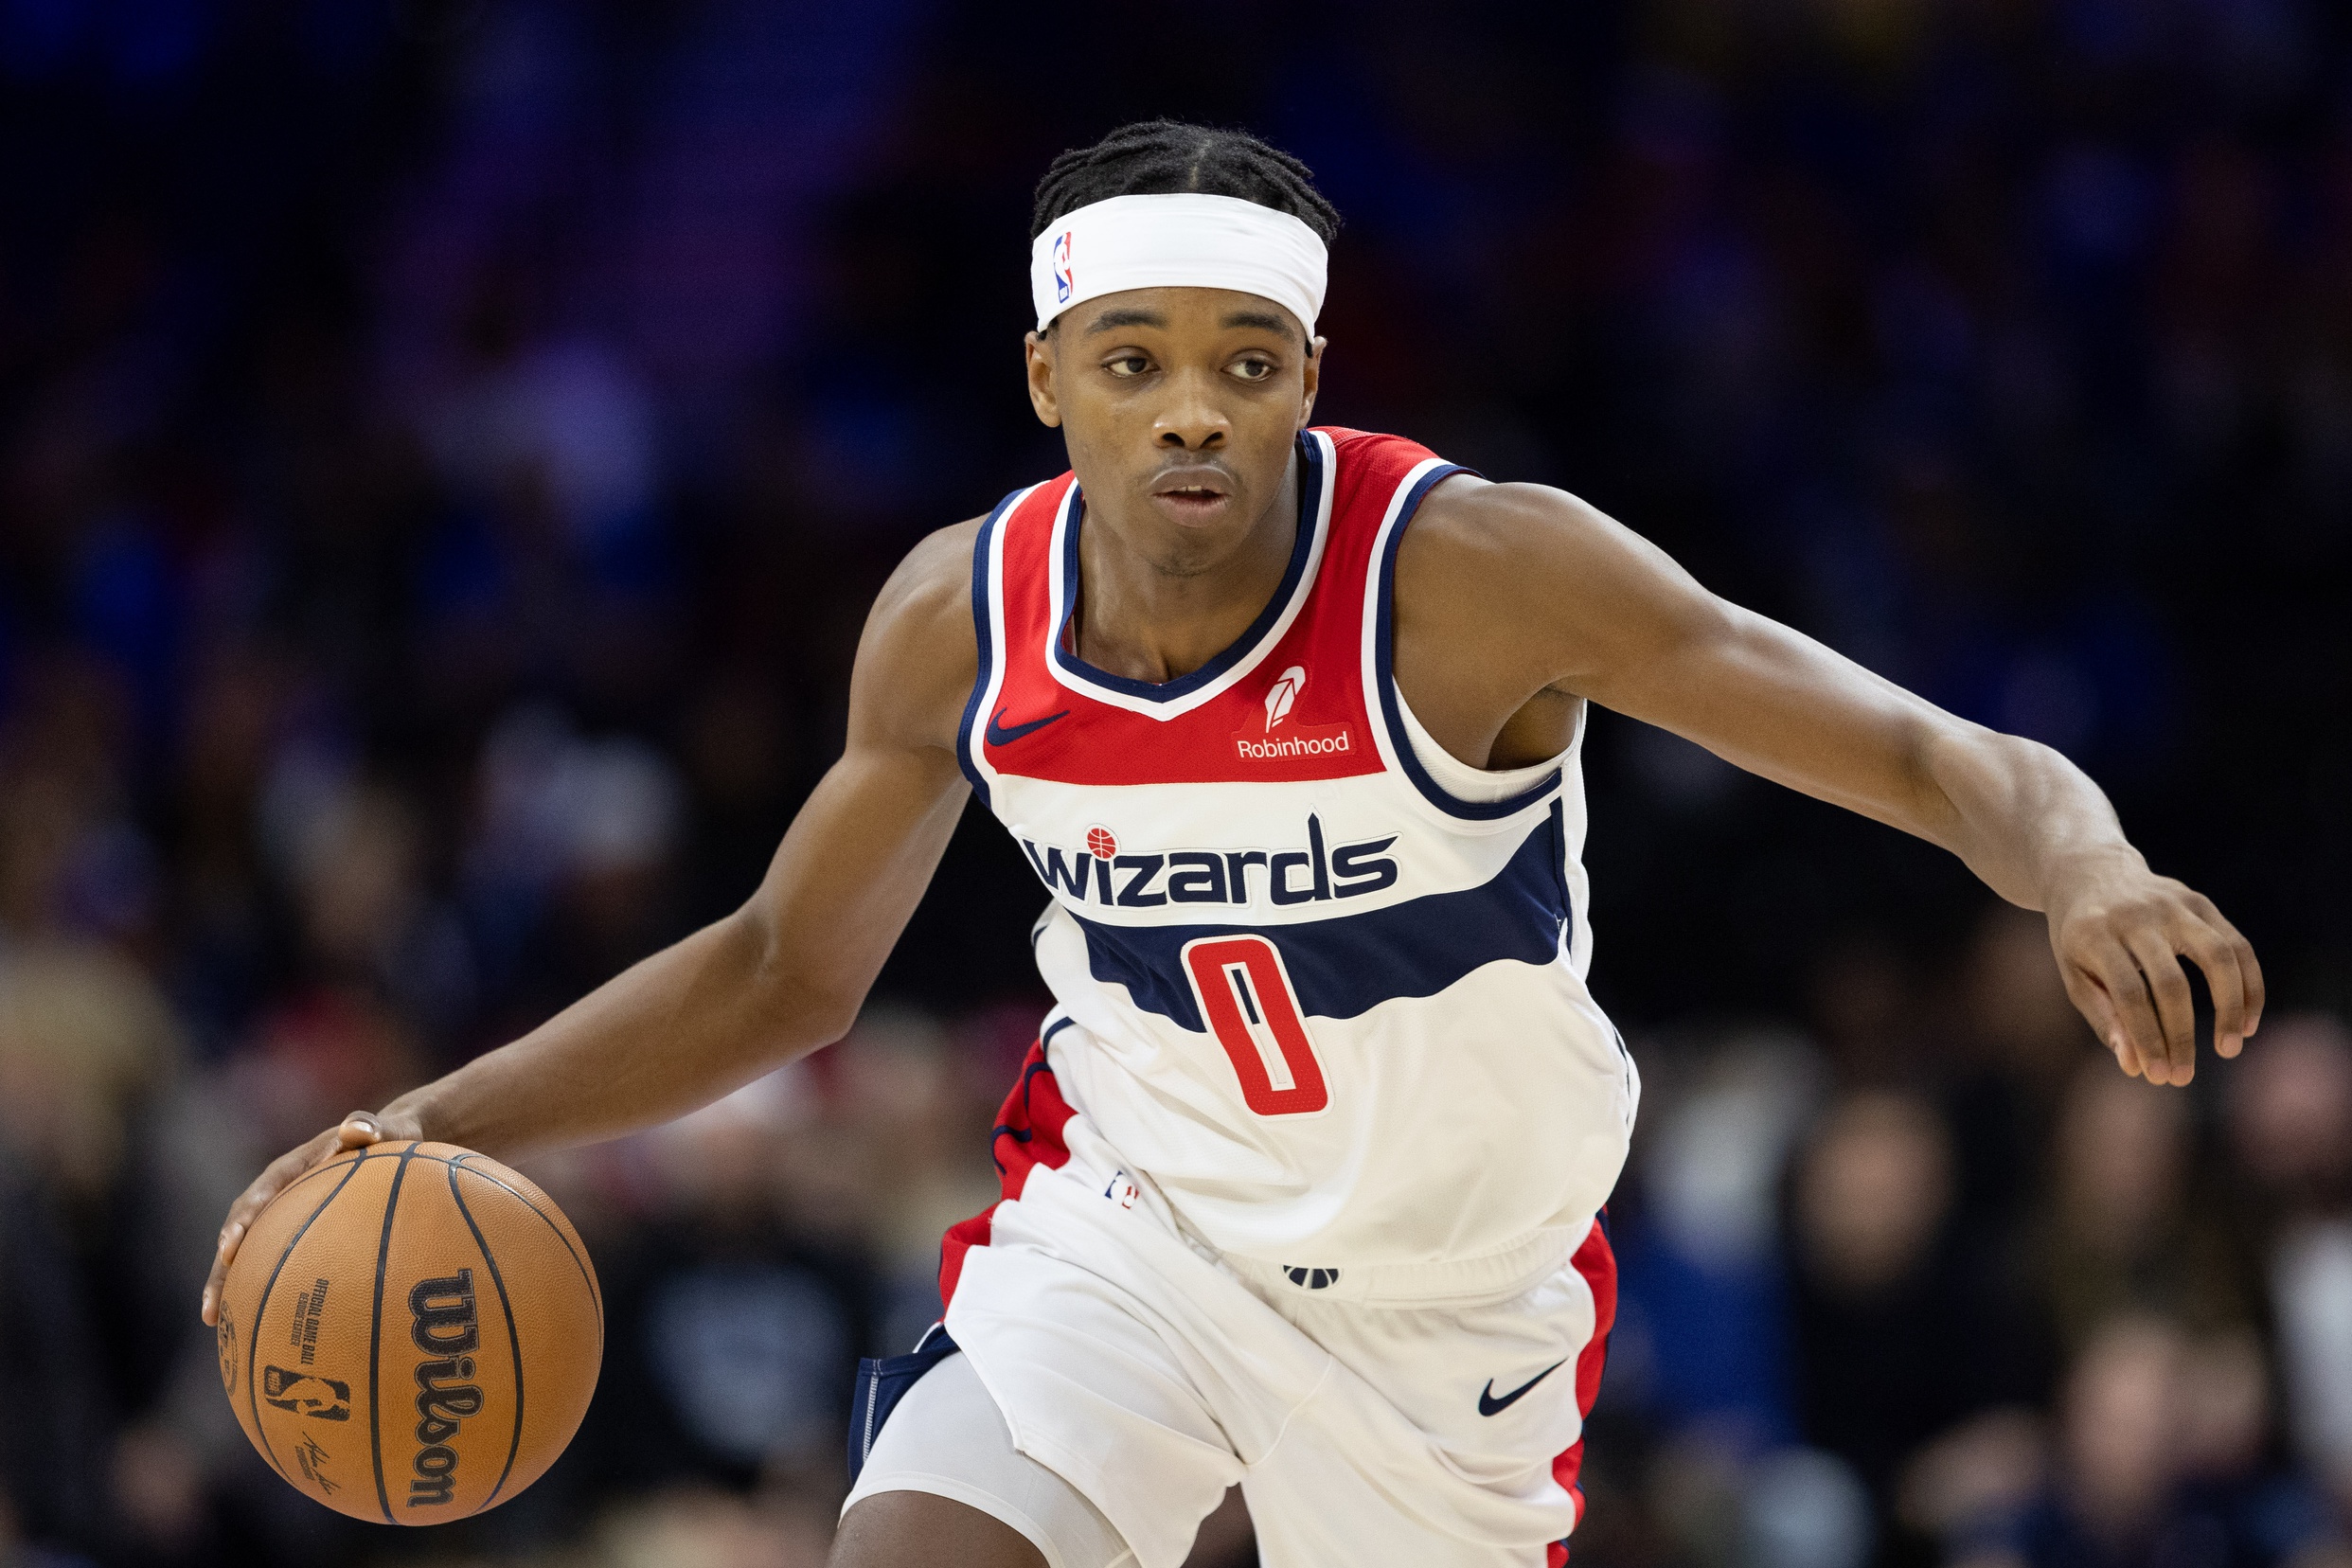 Washington Wizards guard Bilal Coulibaly (0) dribbles the ball against the Philadelphia 76ers during the fourth quarter at Wells Fargo Center.